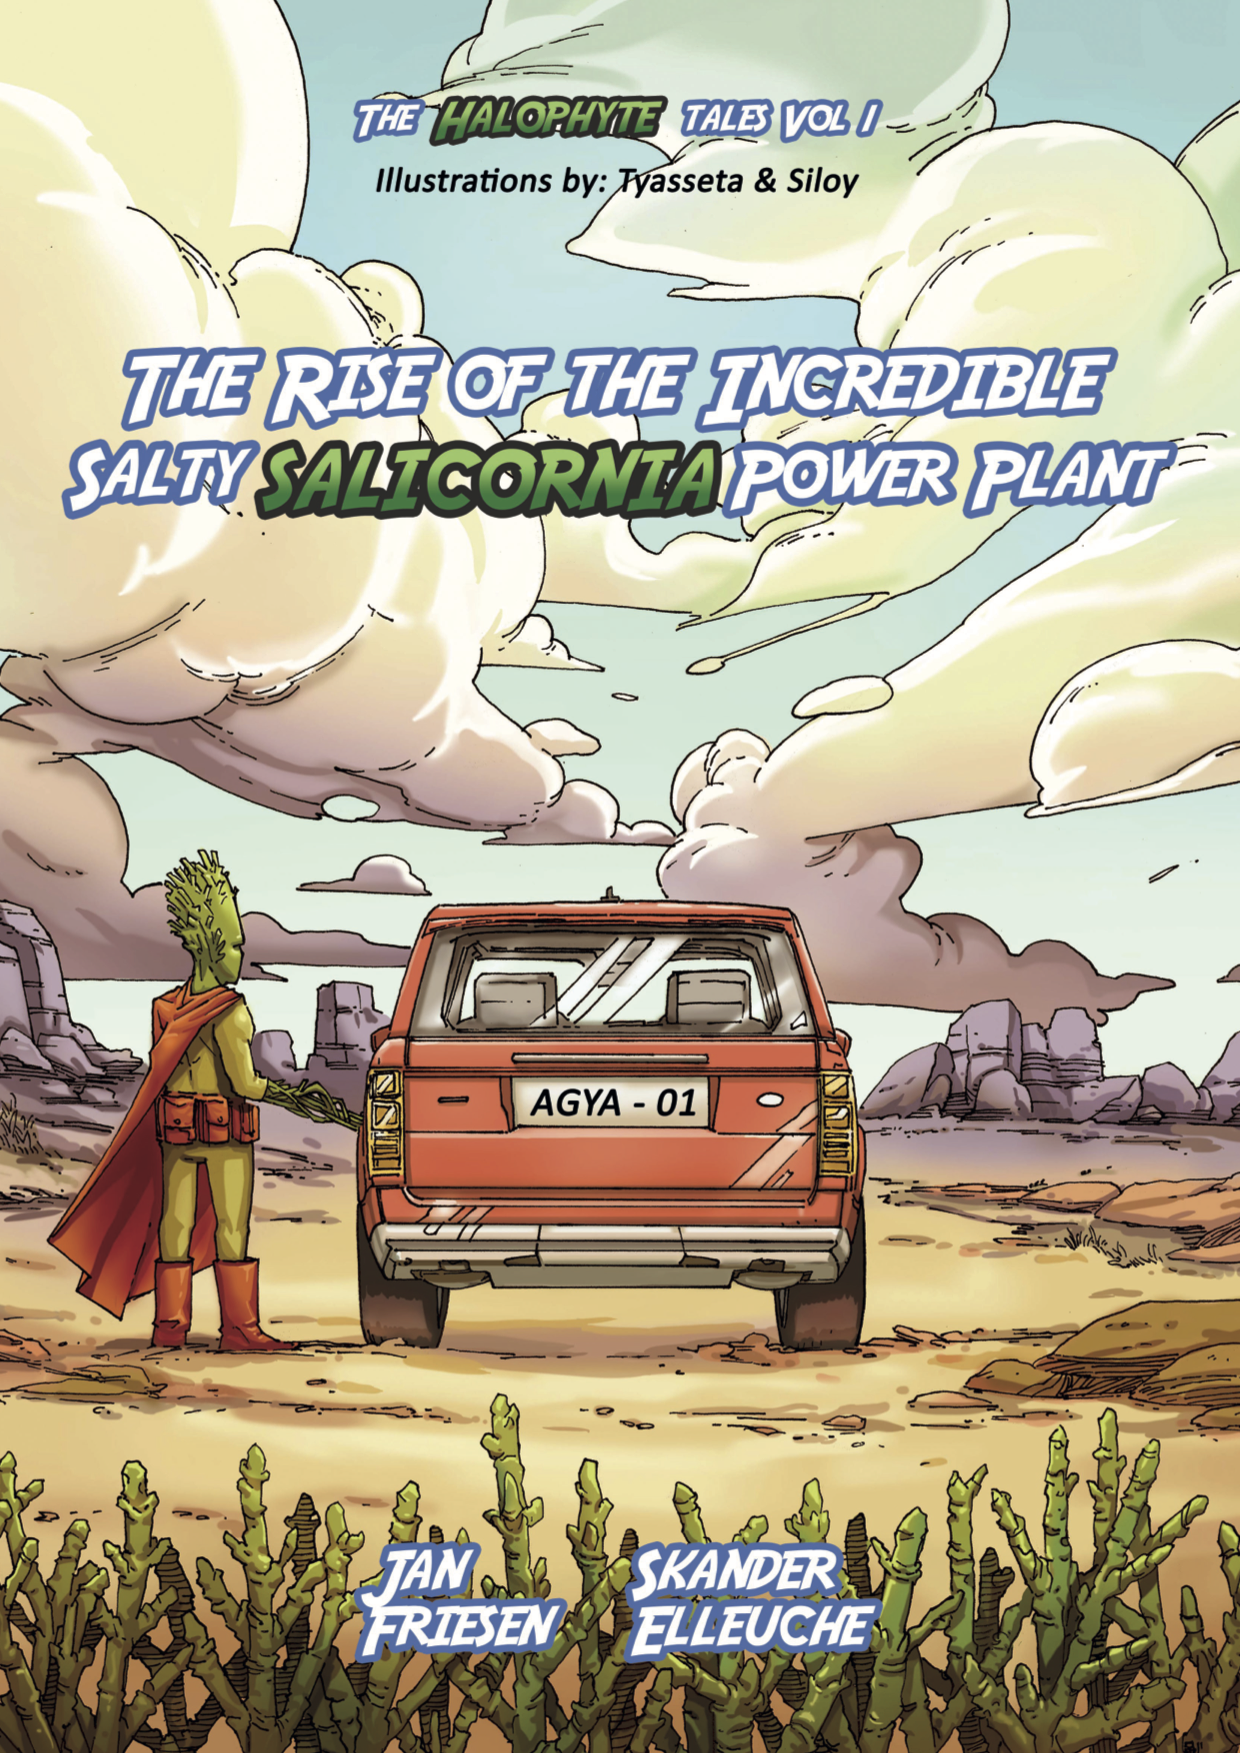 Wissenschaftscomic - The Rise Of The Incredible Salty Salicornia Power Plant